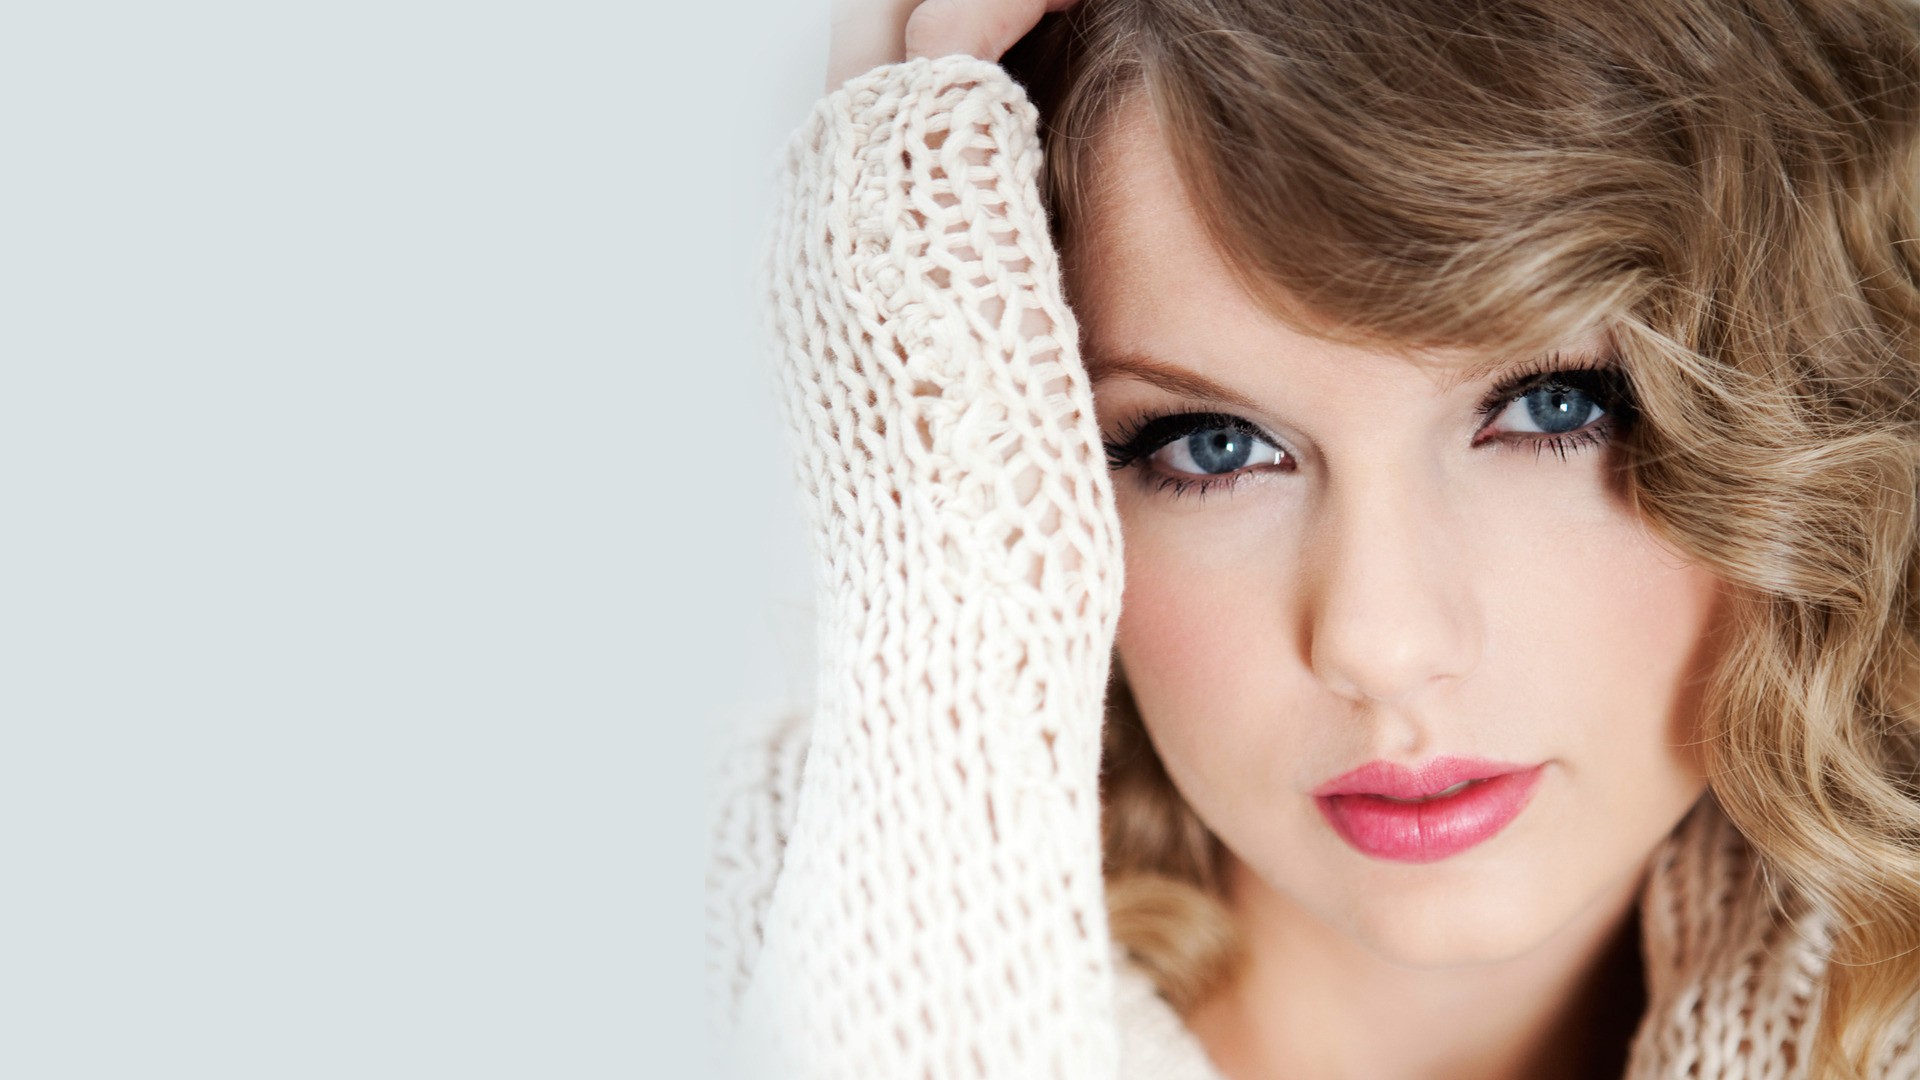 People 1920x1080 Taylor Swift celebrity blonde blue eyes singer netted face women looking at viewer